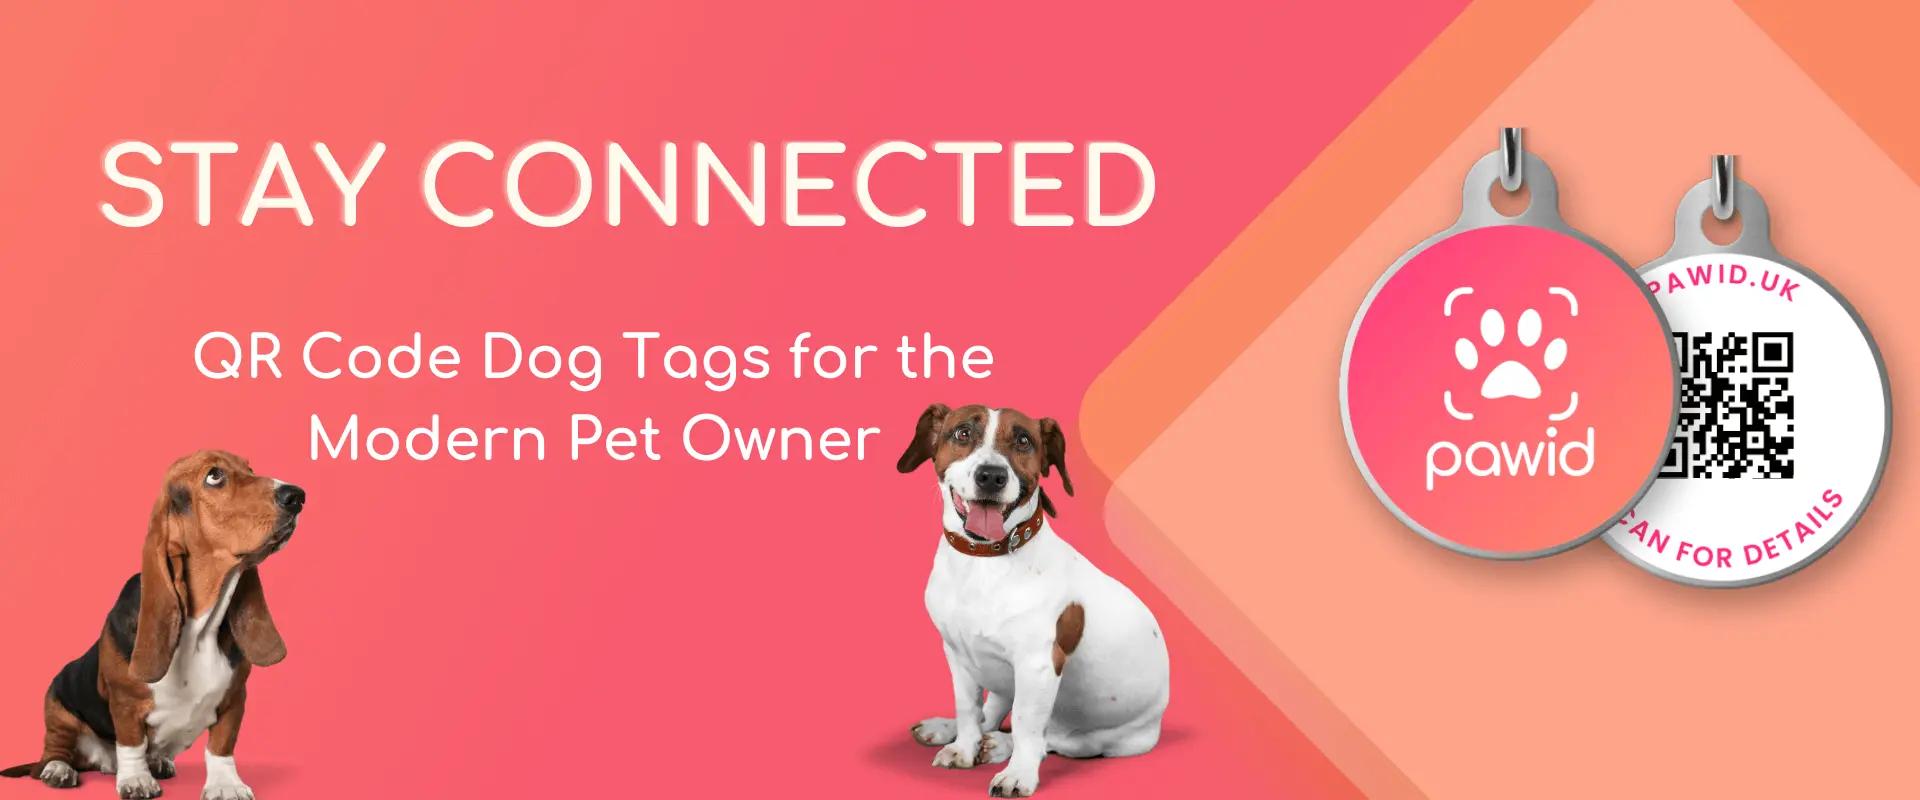 What Are QR Code Dog Tags?